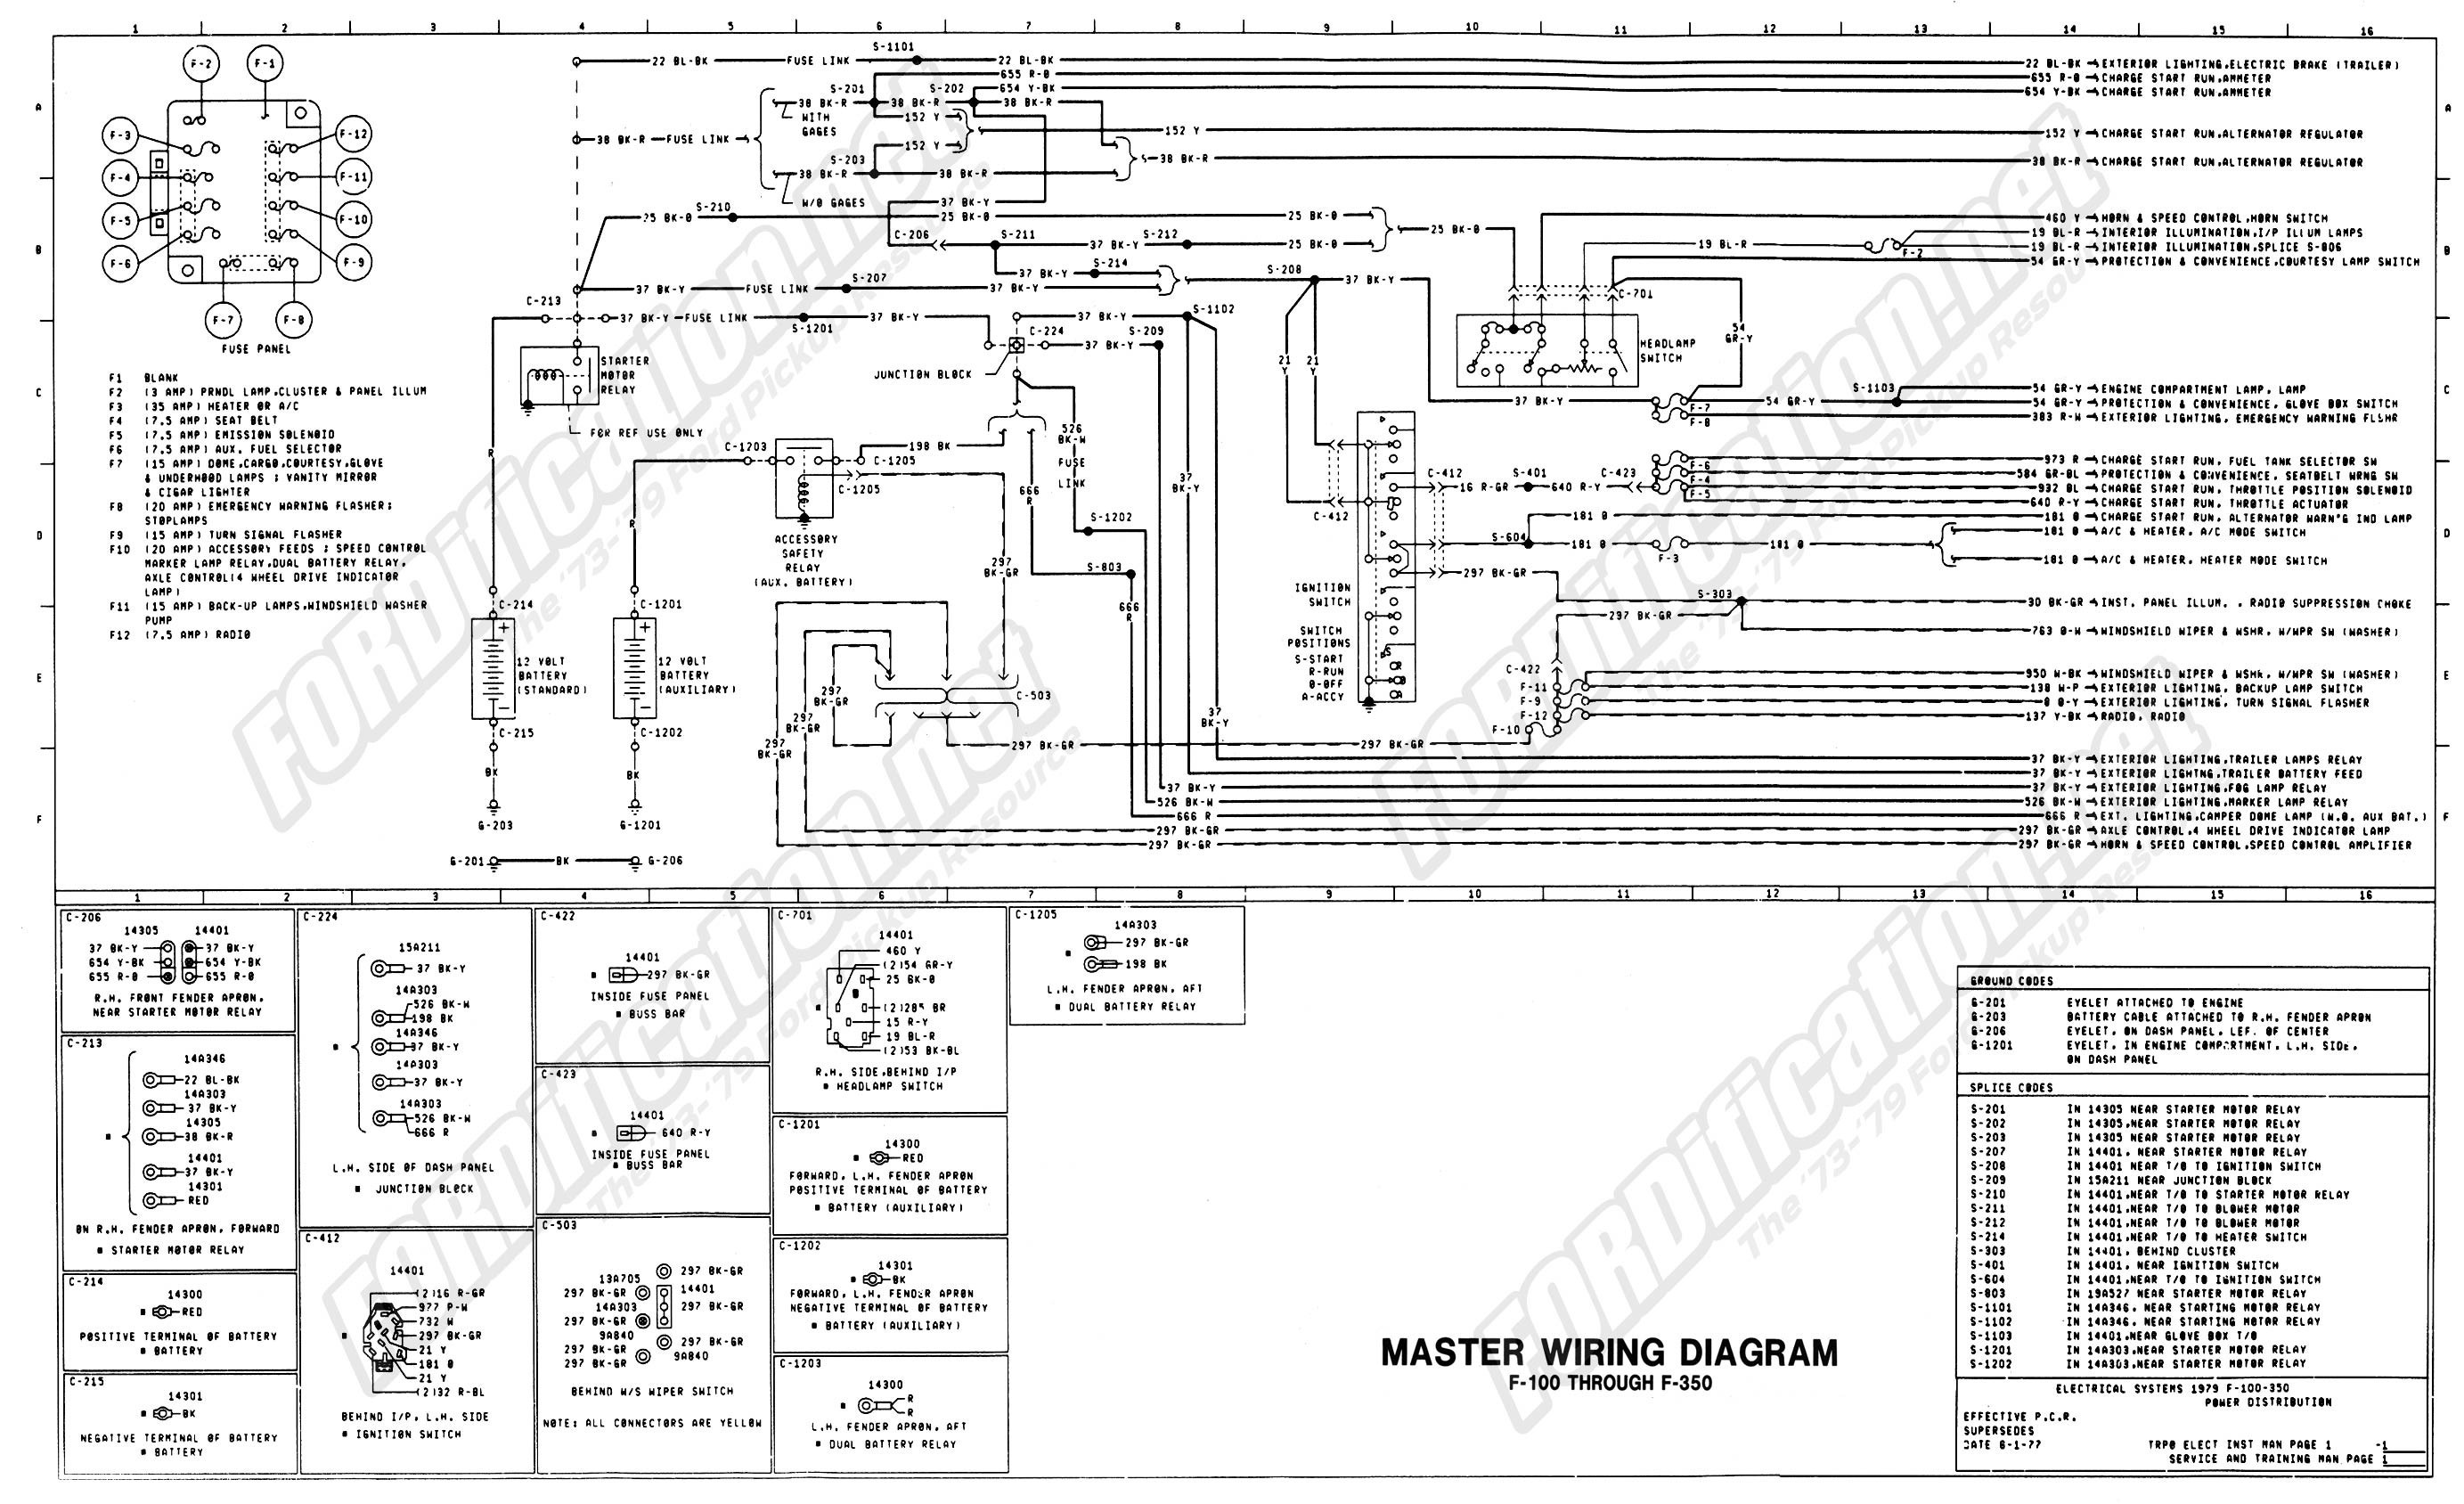 Wiring Diagram for Car Starter Fresh 79 F150 solenoid Wiring Diagram ford Truck Enthusiasts forums